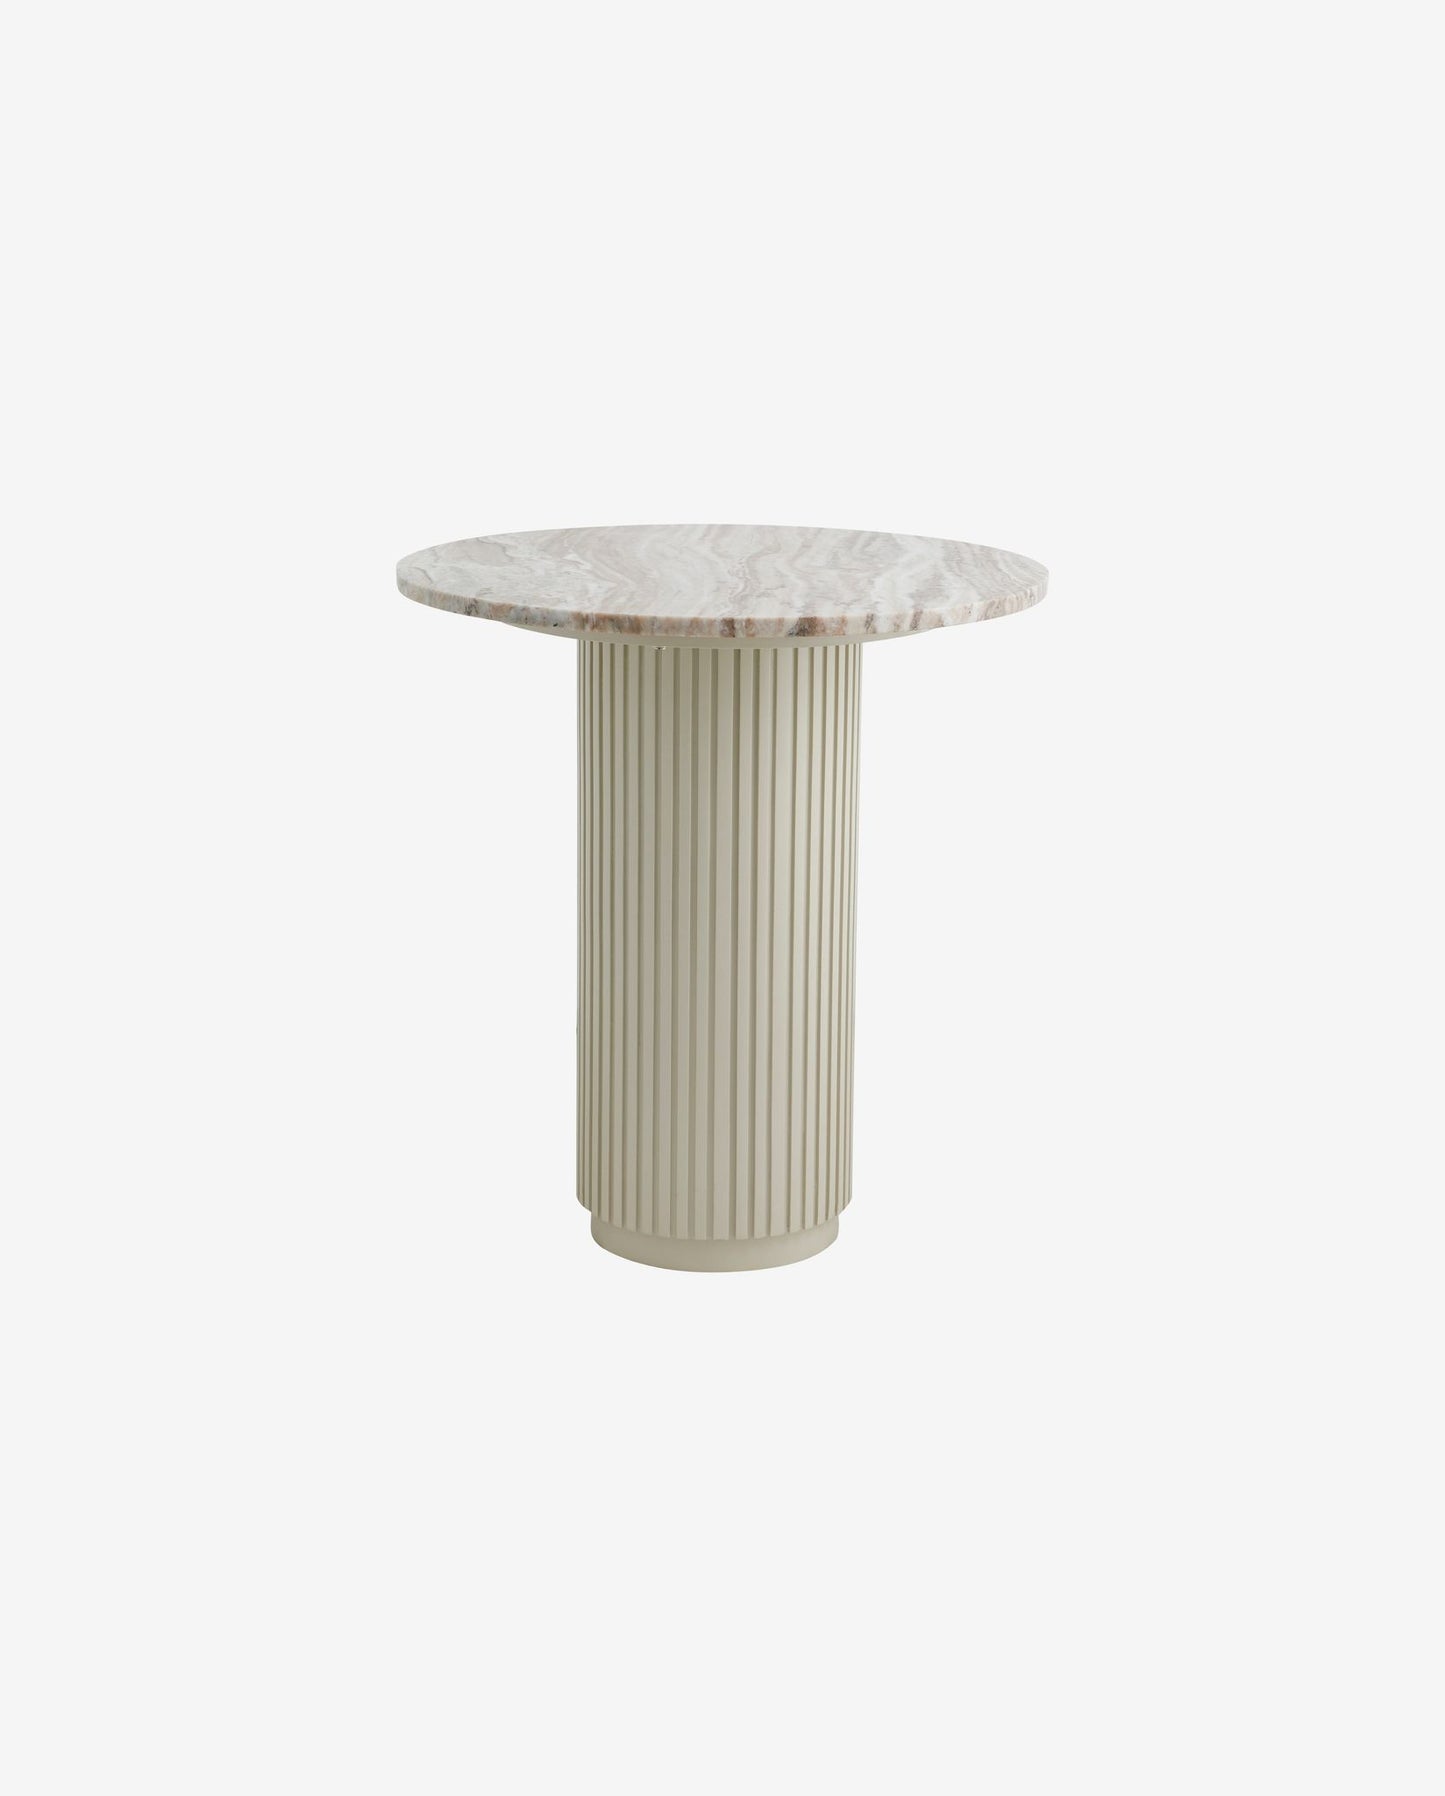 ERIE cafe table - ivory marble top